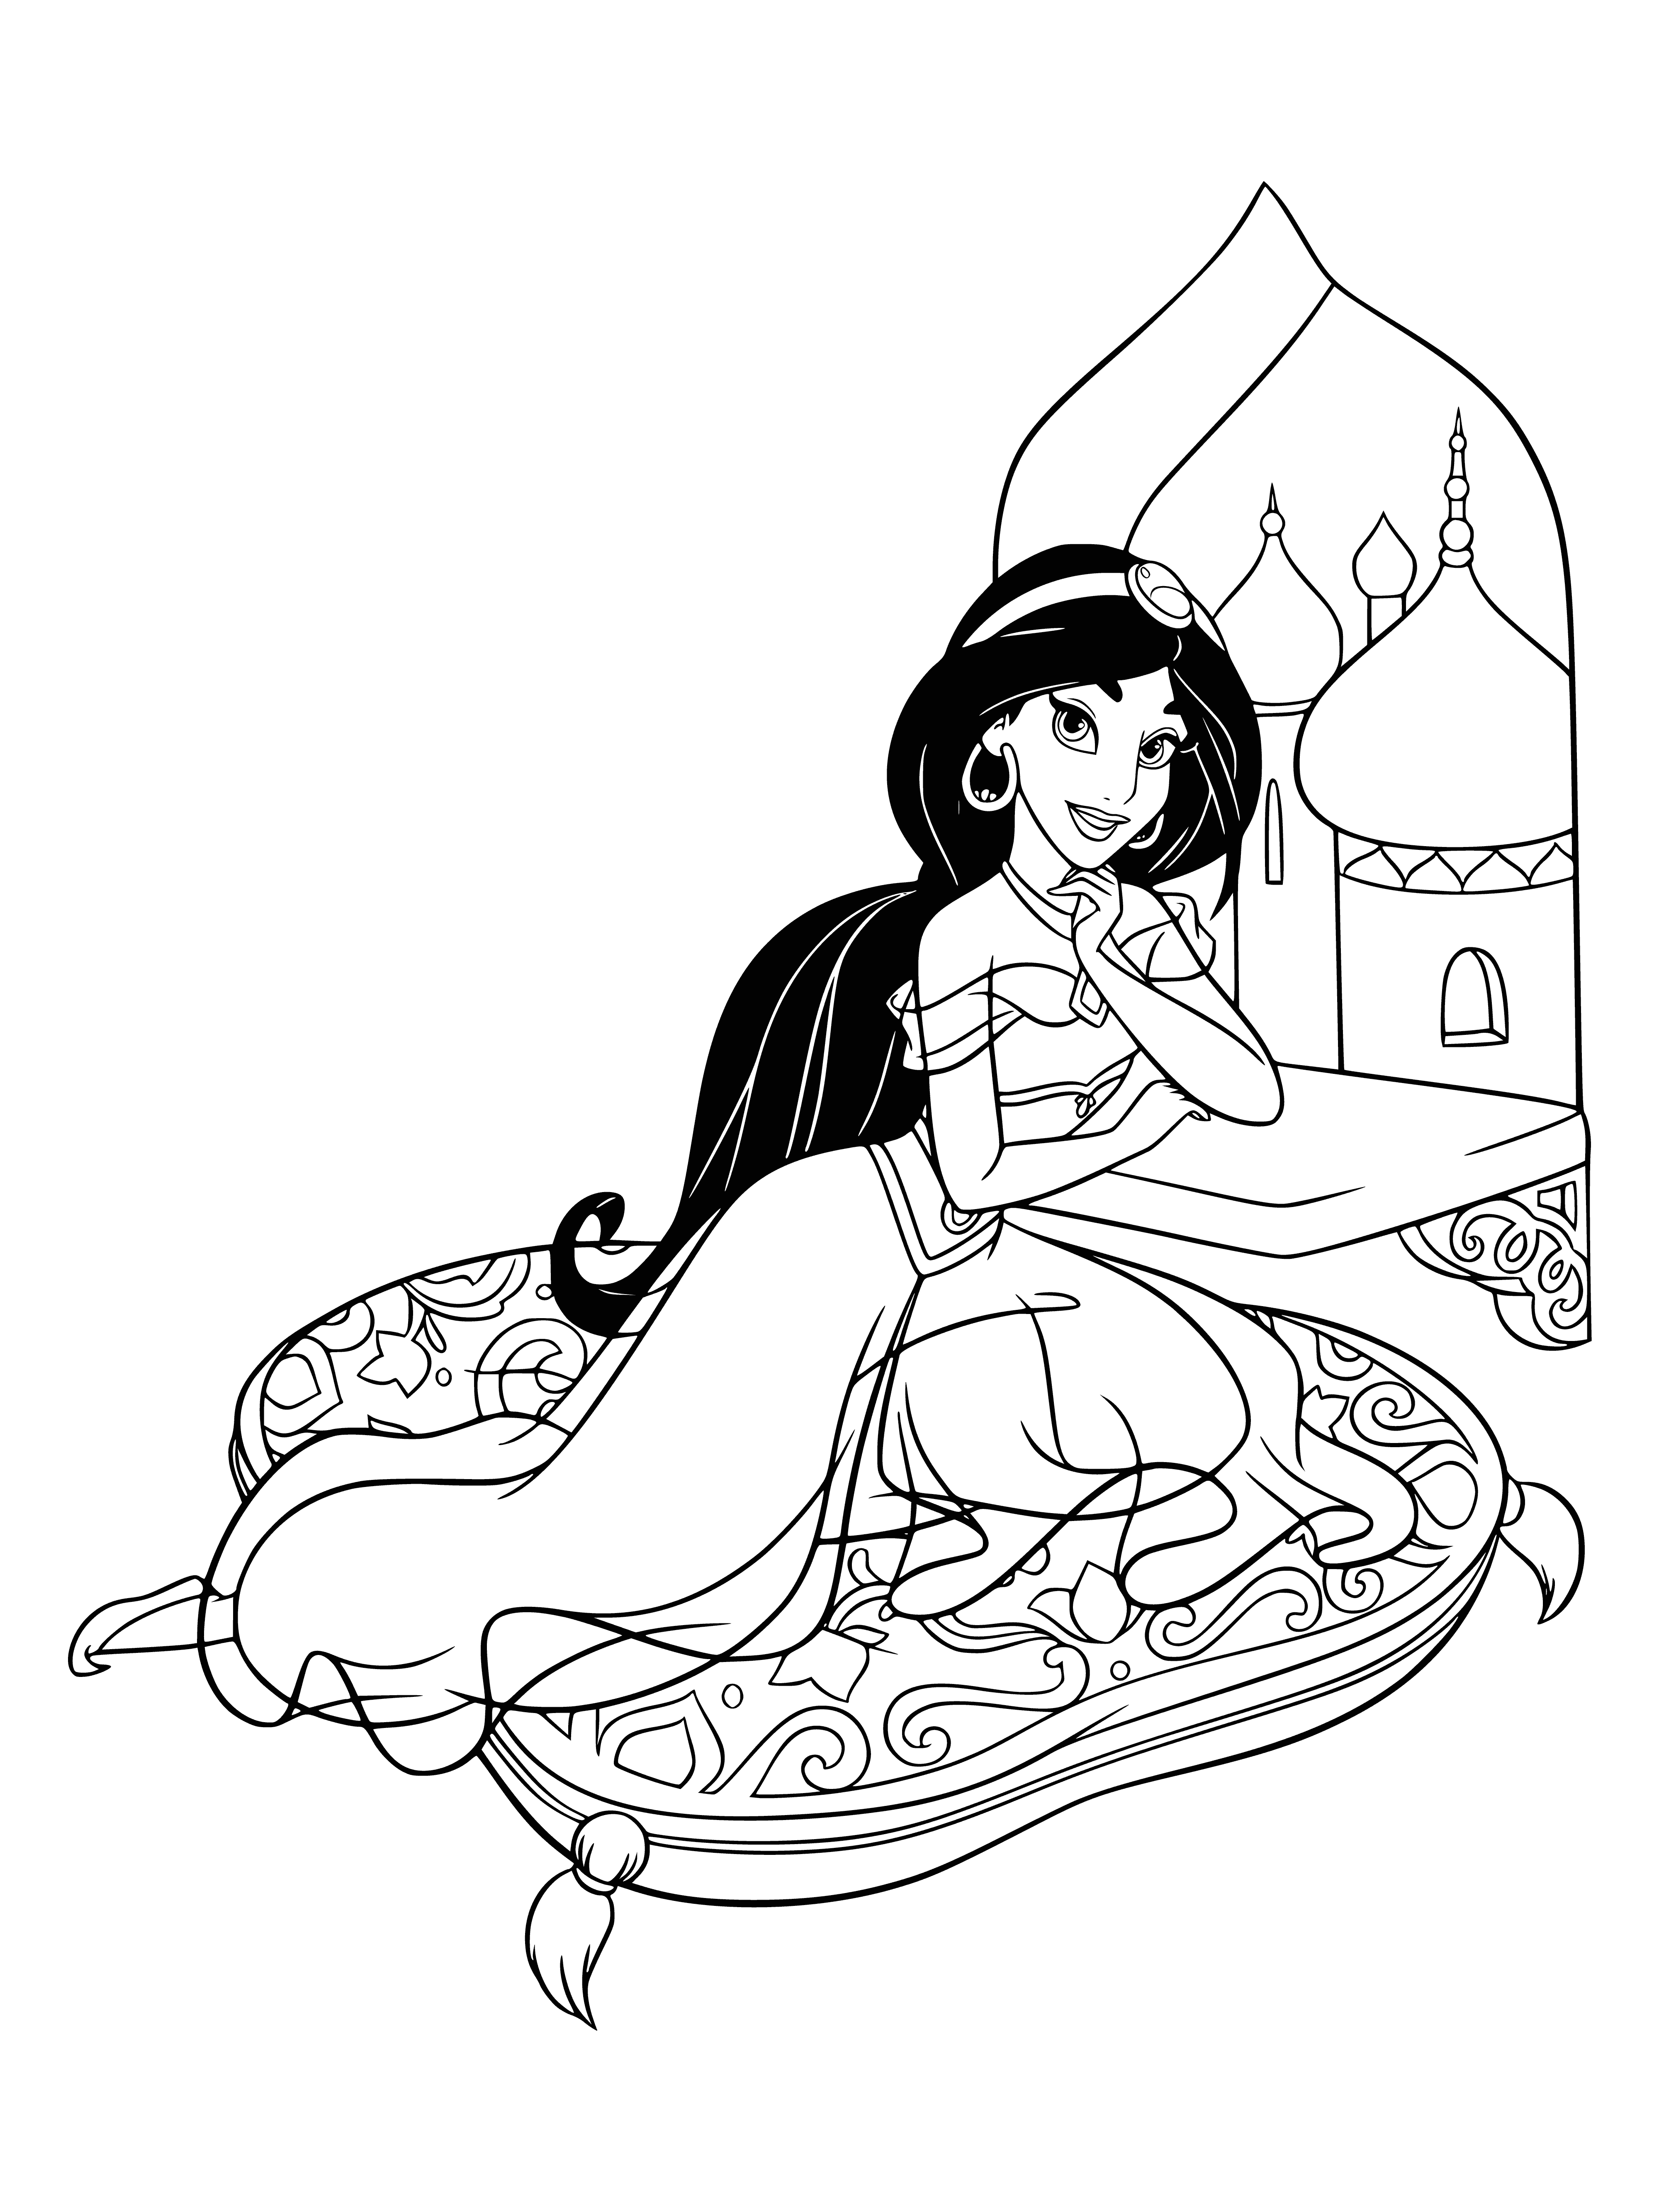 Jasmine at the palace window coloring page